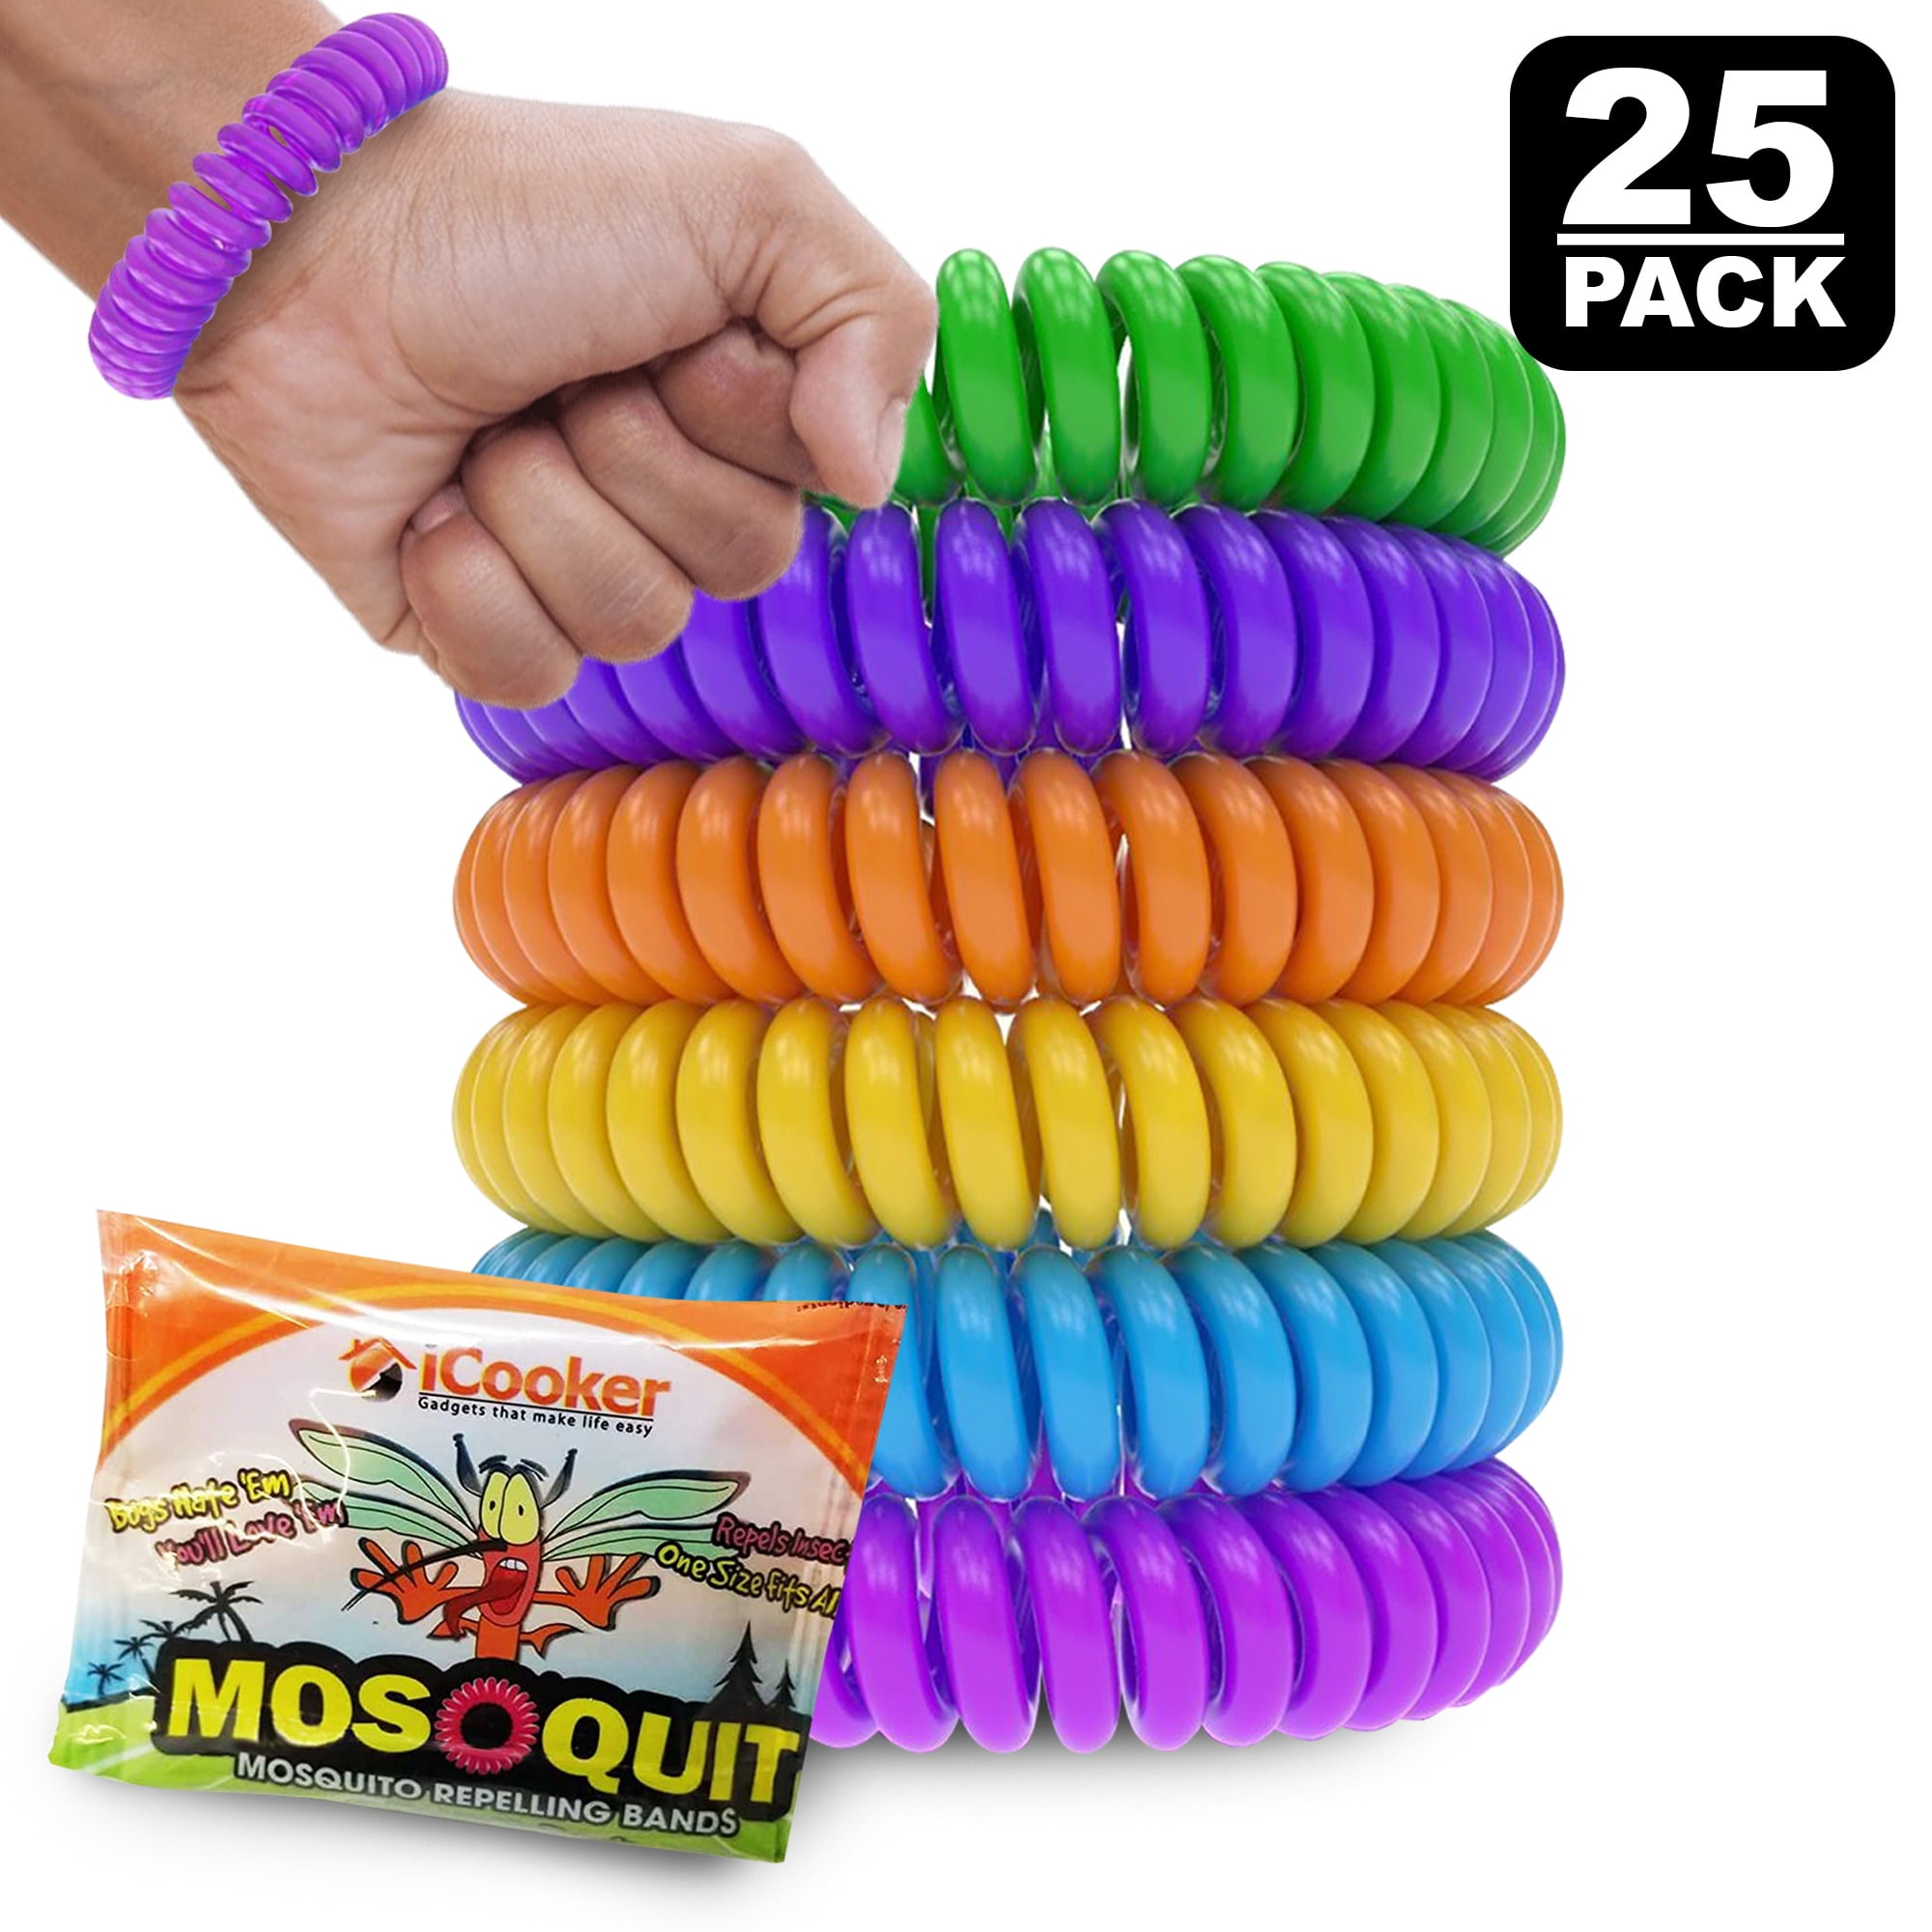 Yithings Mosquito Repellent Bracelet 15 Pack Outdoor Waterproof Insect Repellent Bracelets Safe Made With Natural Plant Oils for Kids & Adults Perfect Camping Hiking